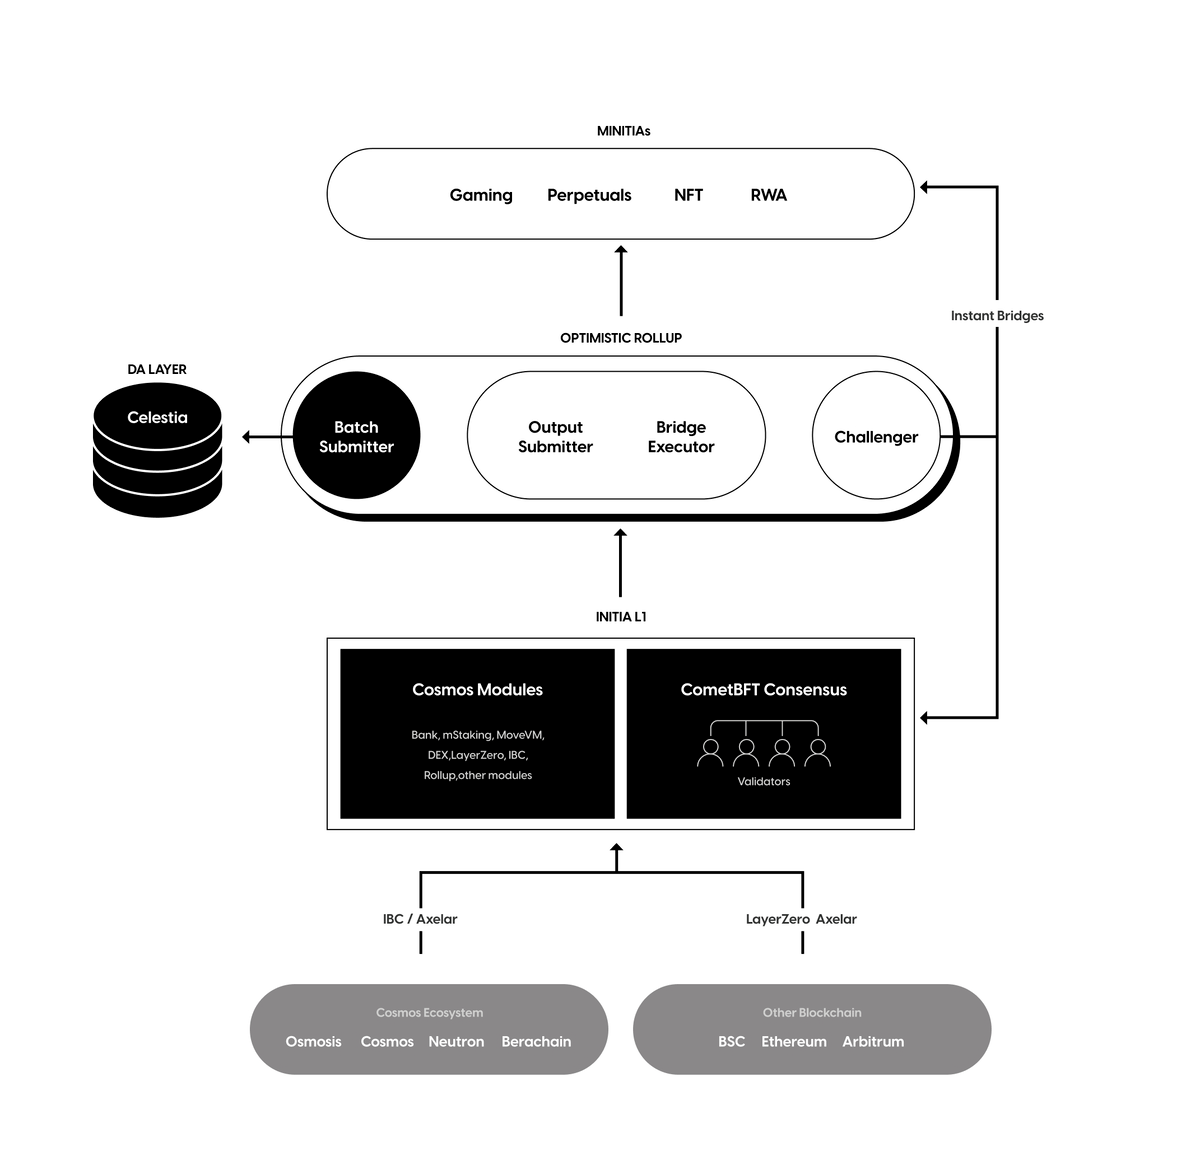 Initia’s technical architecture makes use of a Layer 1 blockchain that connects to its network of interwoven rollups (Mintias) via a unified framework that utilizes a plethora of interconnected elements. (Image Credit: Omnitia Architecture via the Initia documentation)